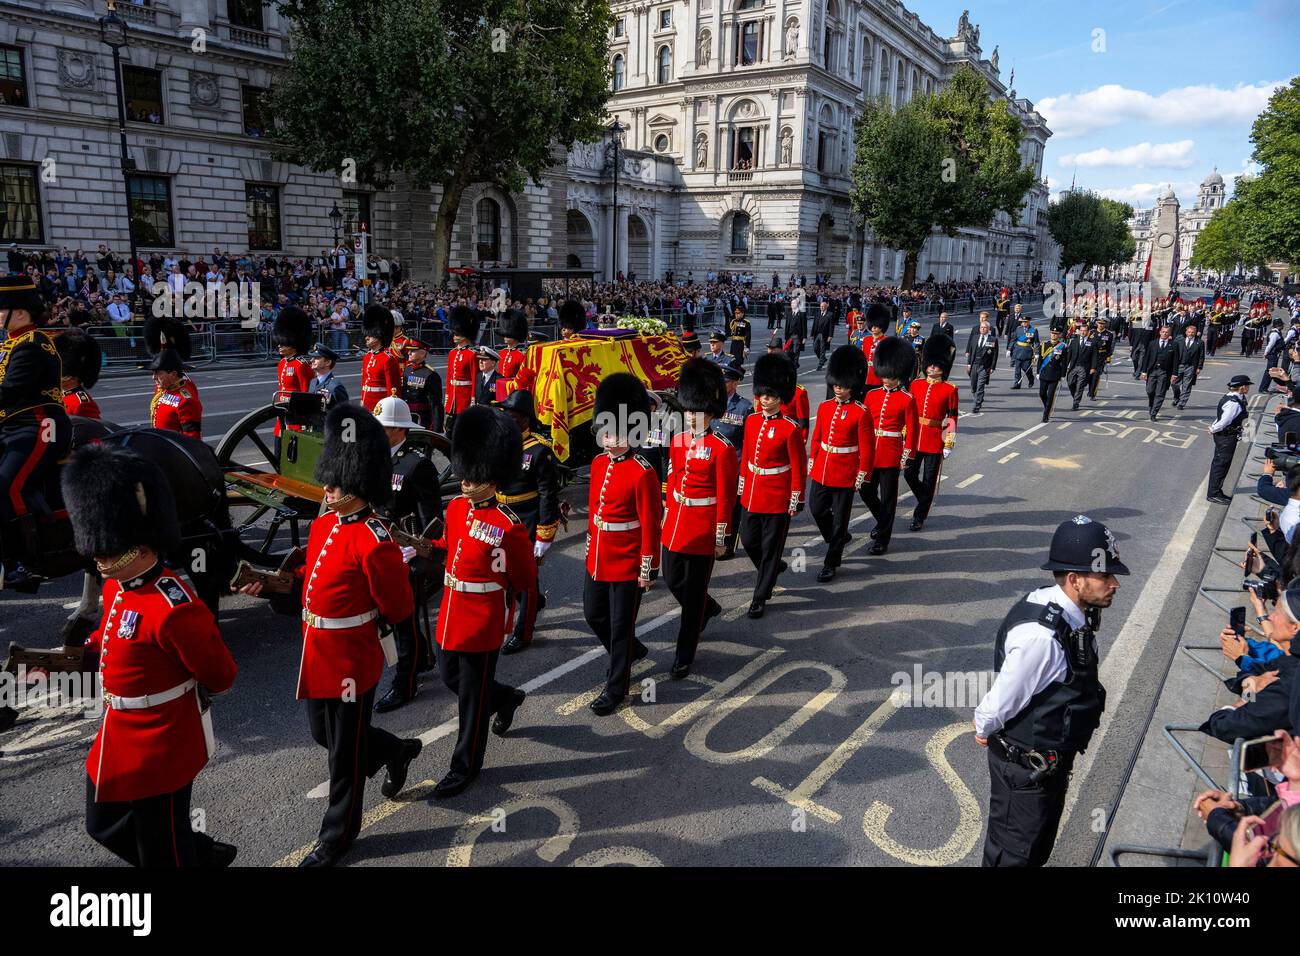 Queen Elizabeth II's coffin is taken in procession Buckingham Palace to Westminster Hall after her death on 8th September 2022. Stock Photo